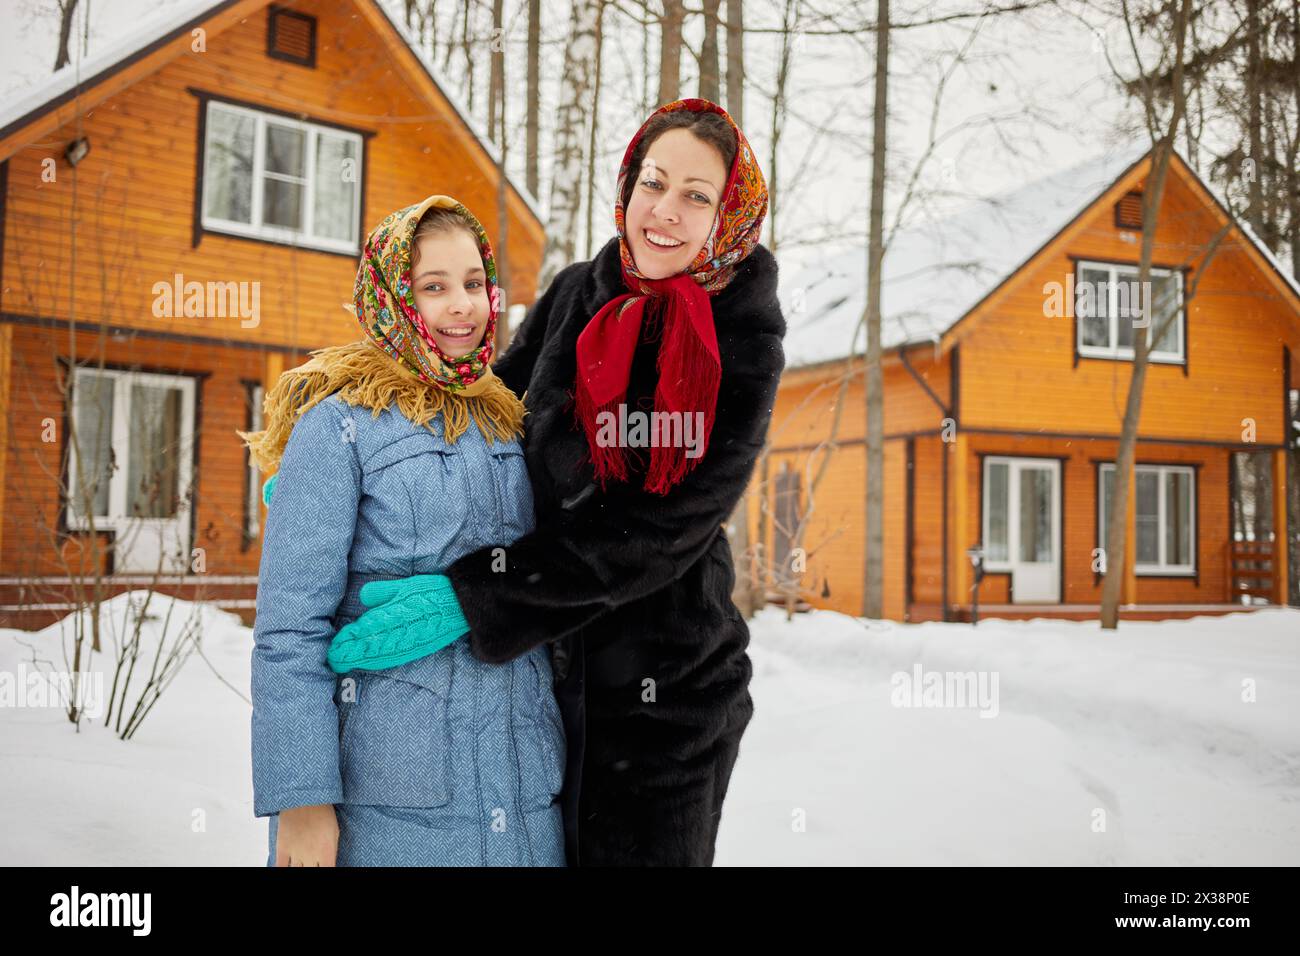 Smiling woman and teenage girl in folk style shawls stand against wooden houses on winter day. Stock Photo